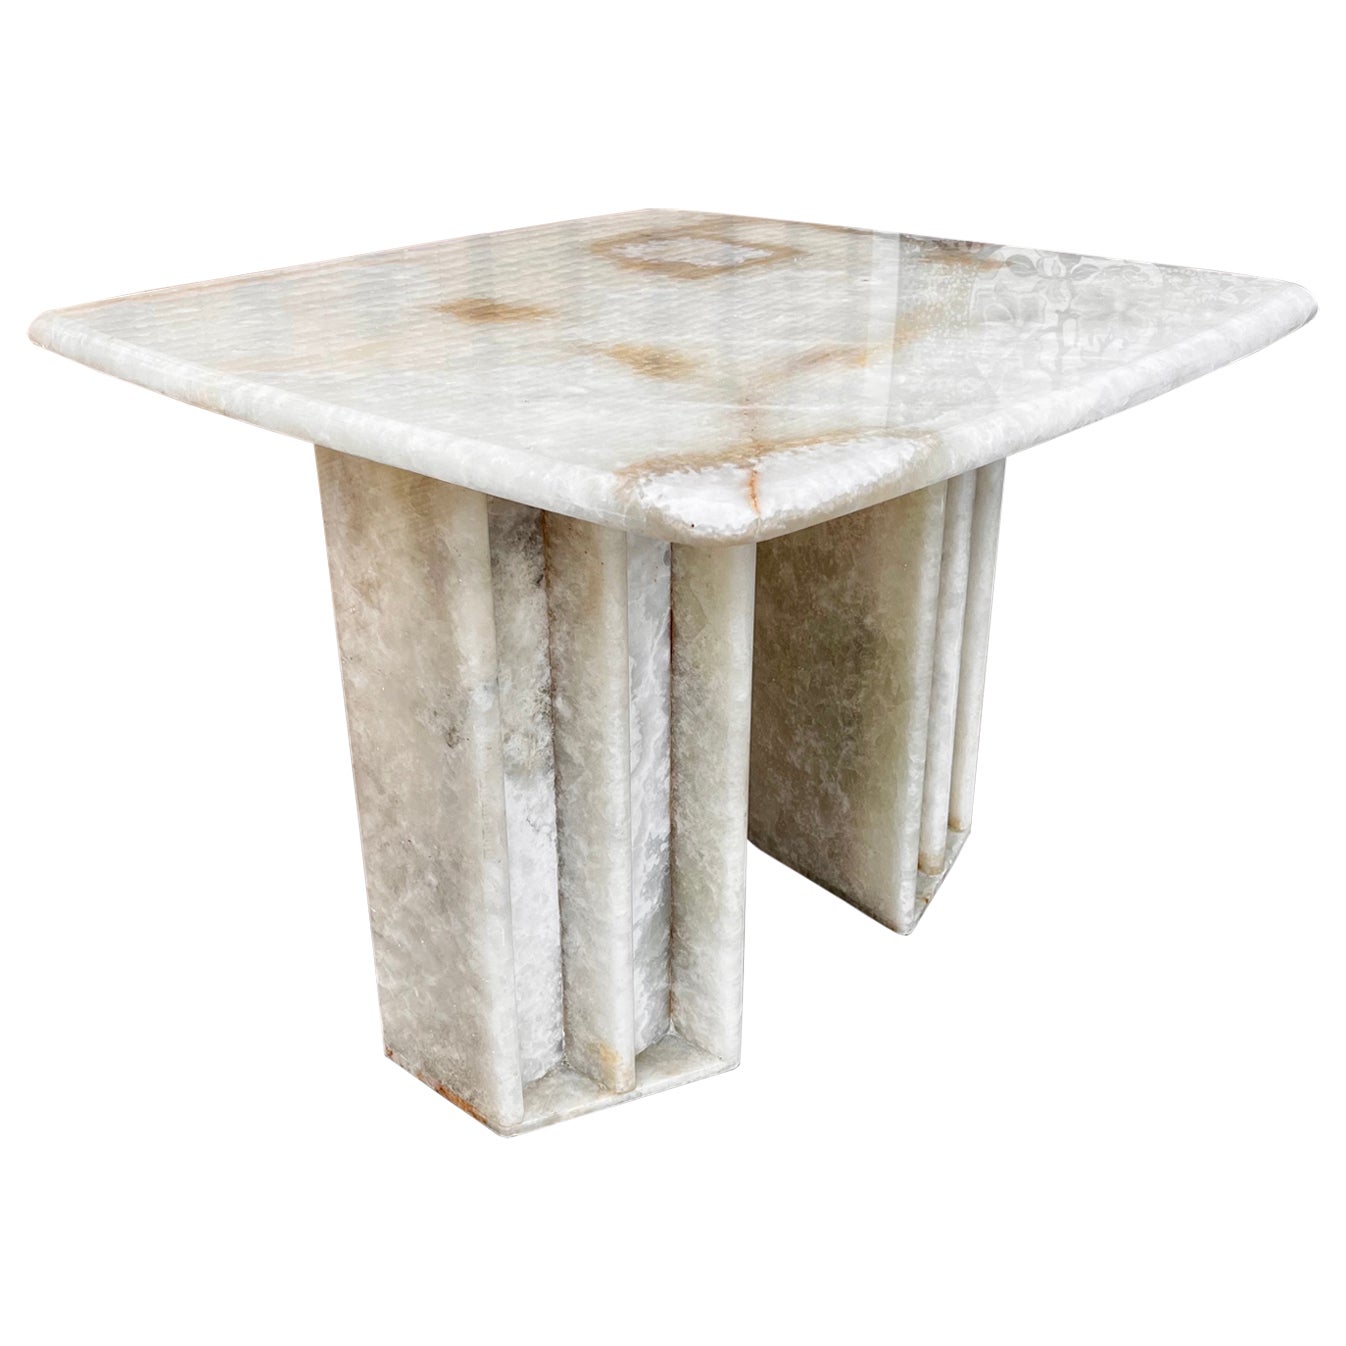 1980s Postmodern White Onyx Marble Occasional Size Table